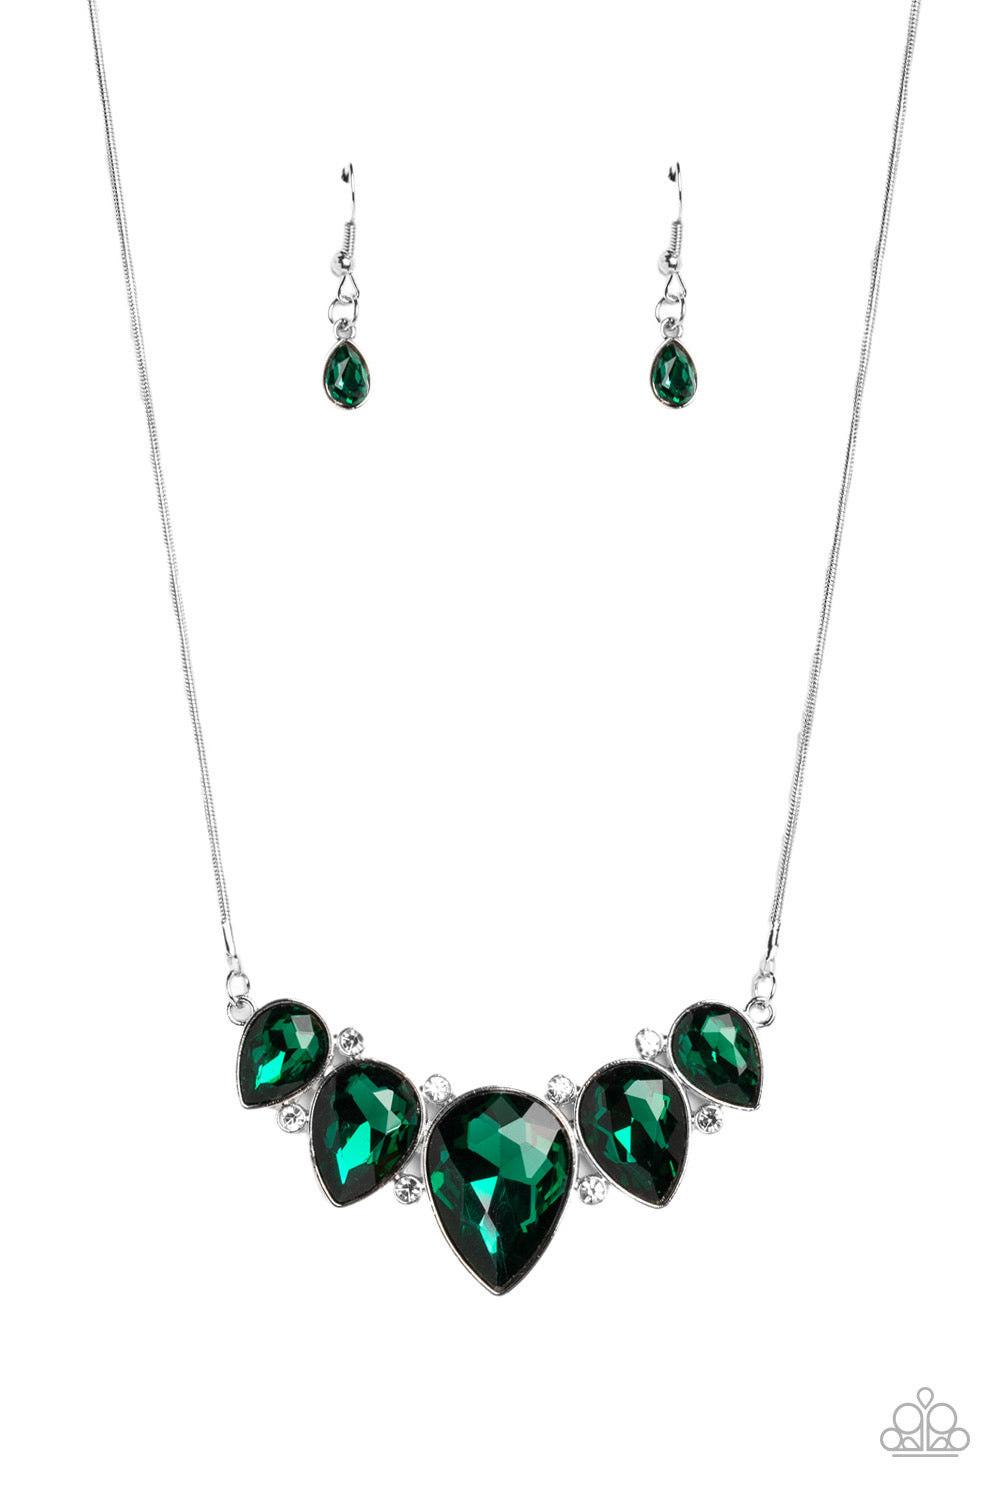 Paparazzi Regally Refined - Green Necklace -Paparazzi Jewelry Images